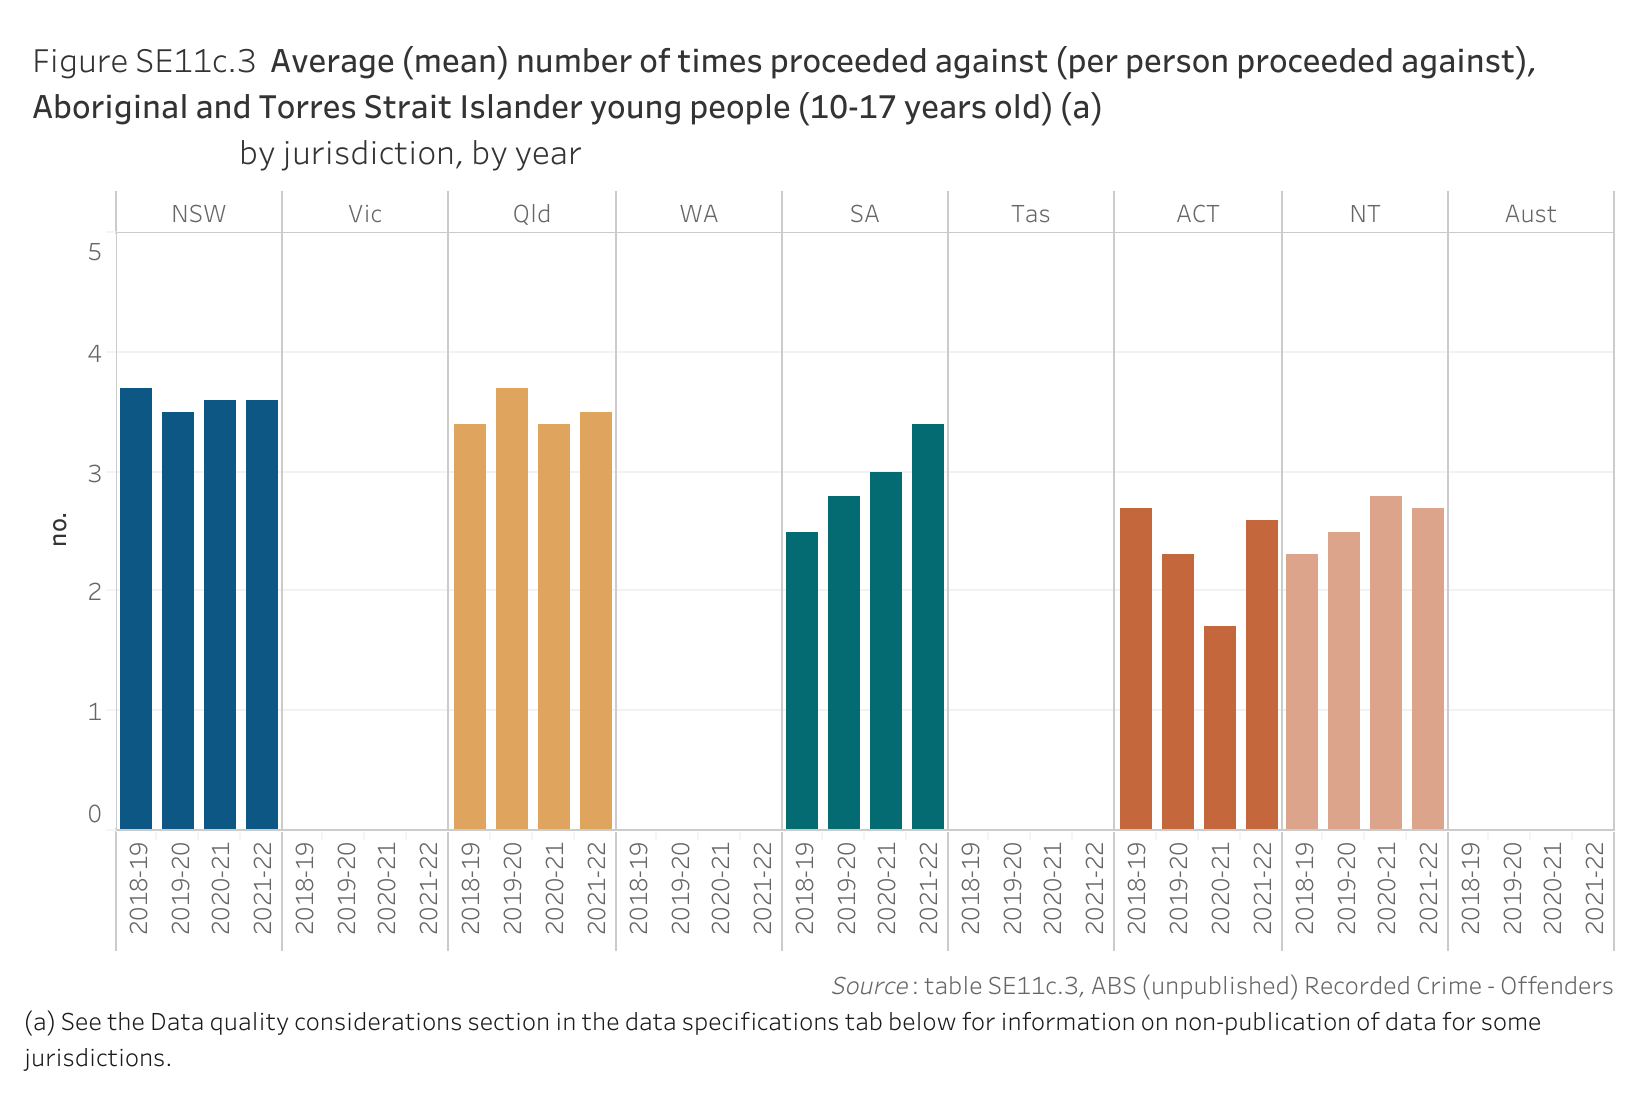 Figure SE11c.3 shows the average (mean) number of times proceeded against (per person proceeded against), Aboriginal and Torres Strait Islander young people (10-17 years old), by jurisdiction, by year. More details can be found within the text near this image.